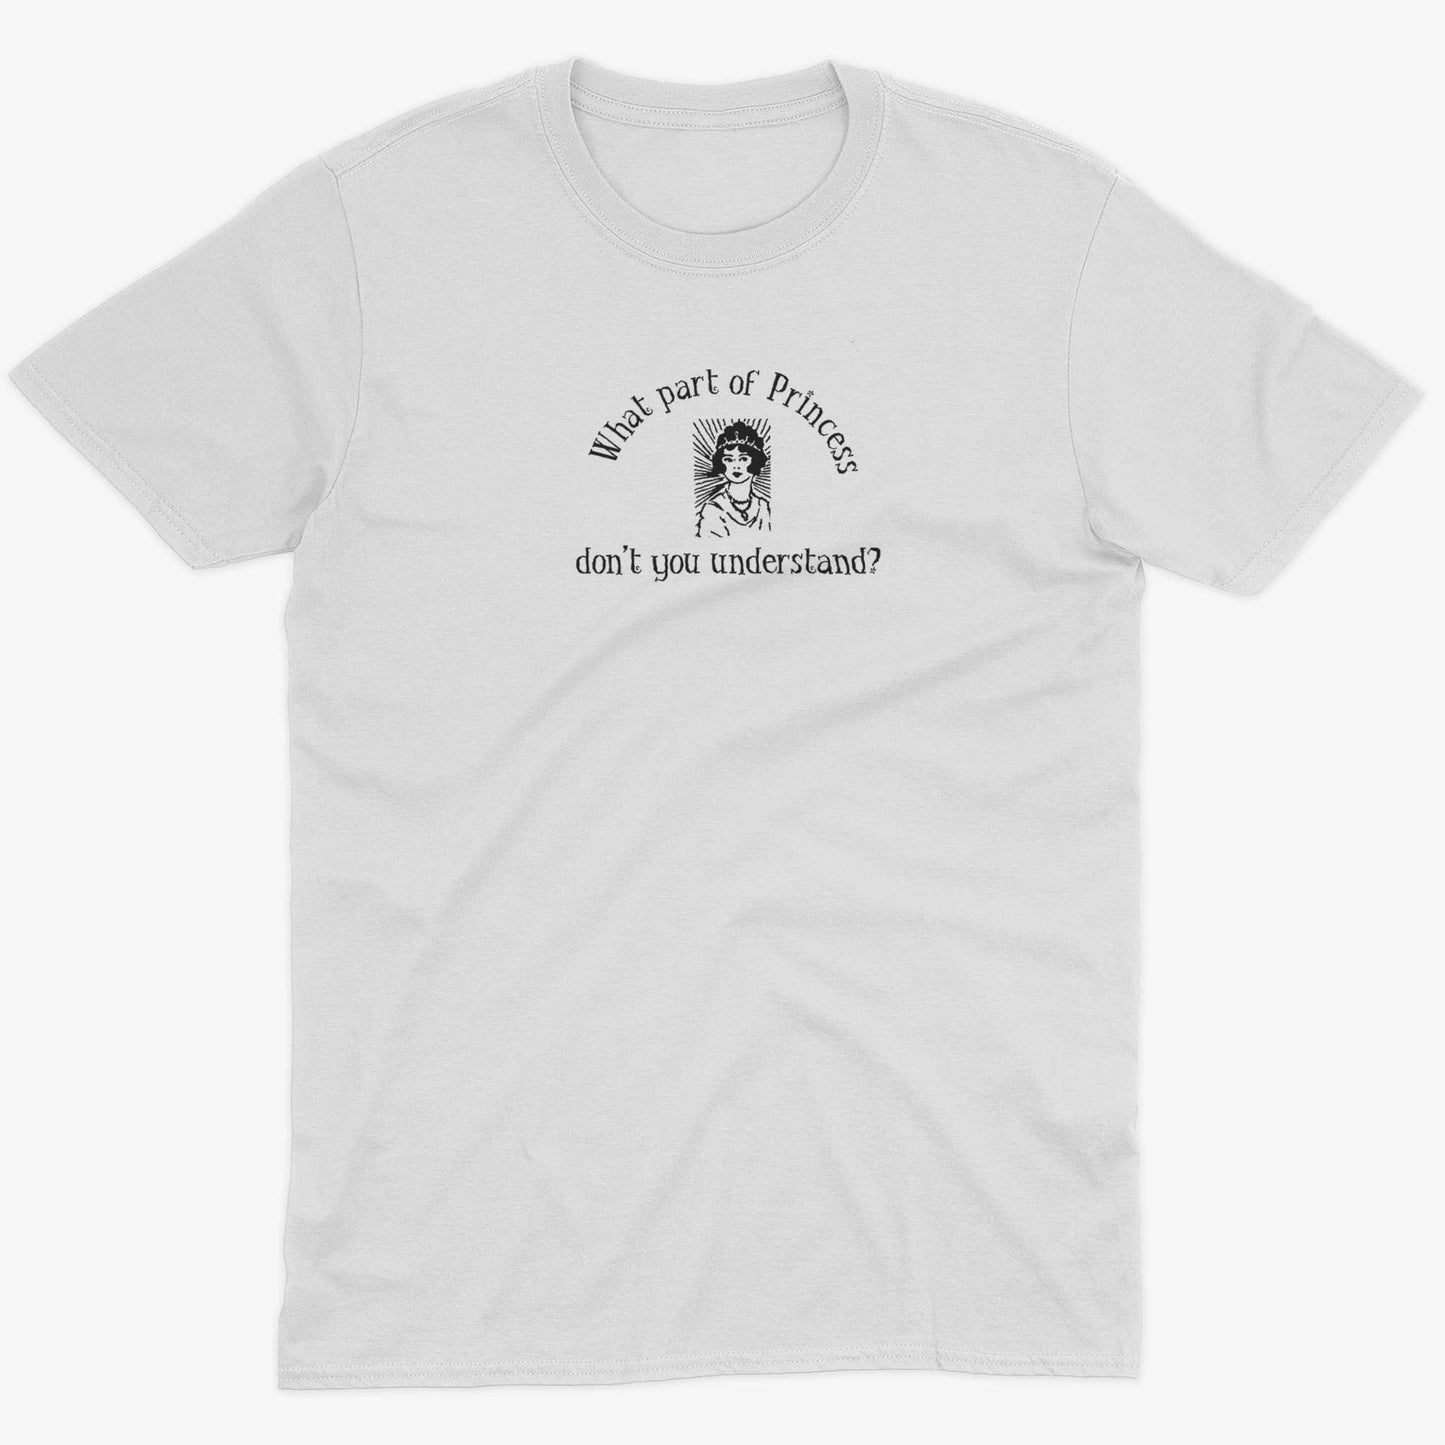 What Part Of Princess Don't You Understand? Unisex Or Women's Cotton T-shirt-White-Unisex